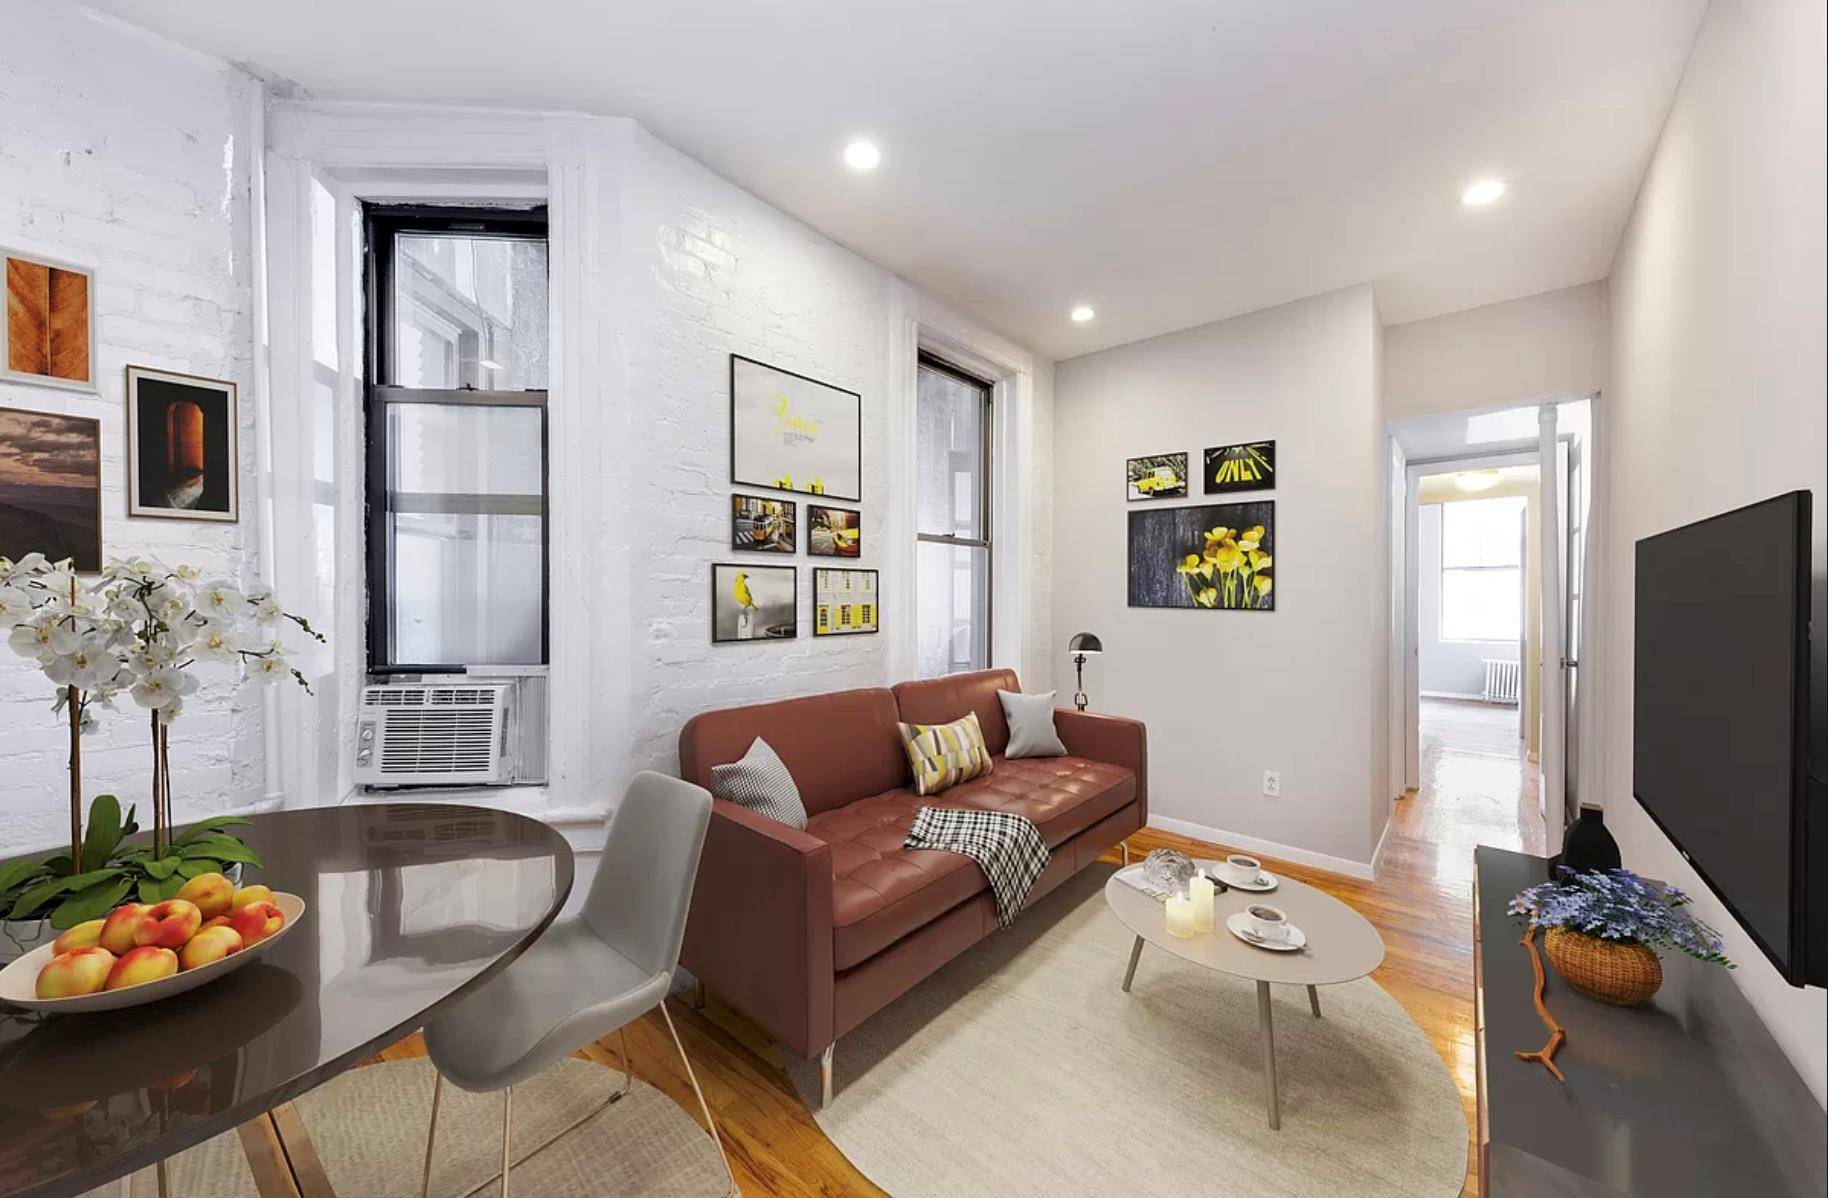 AVAILABLE JUNE 1OPEN HOUSE IS BY APPOINTMENTLAUNDRY IN BUILDINGLarge renovated 2 Bedroom in Prime Chelsea !